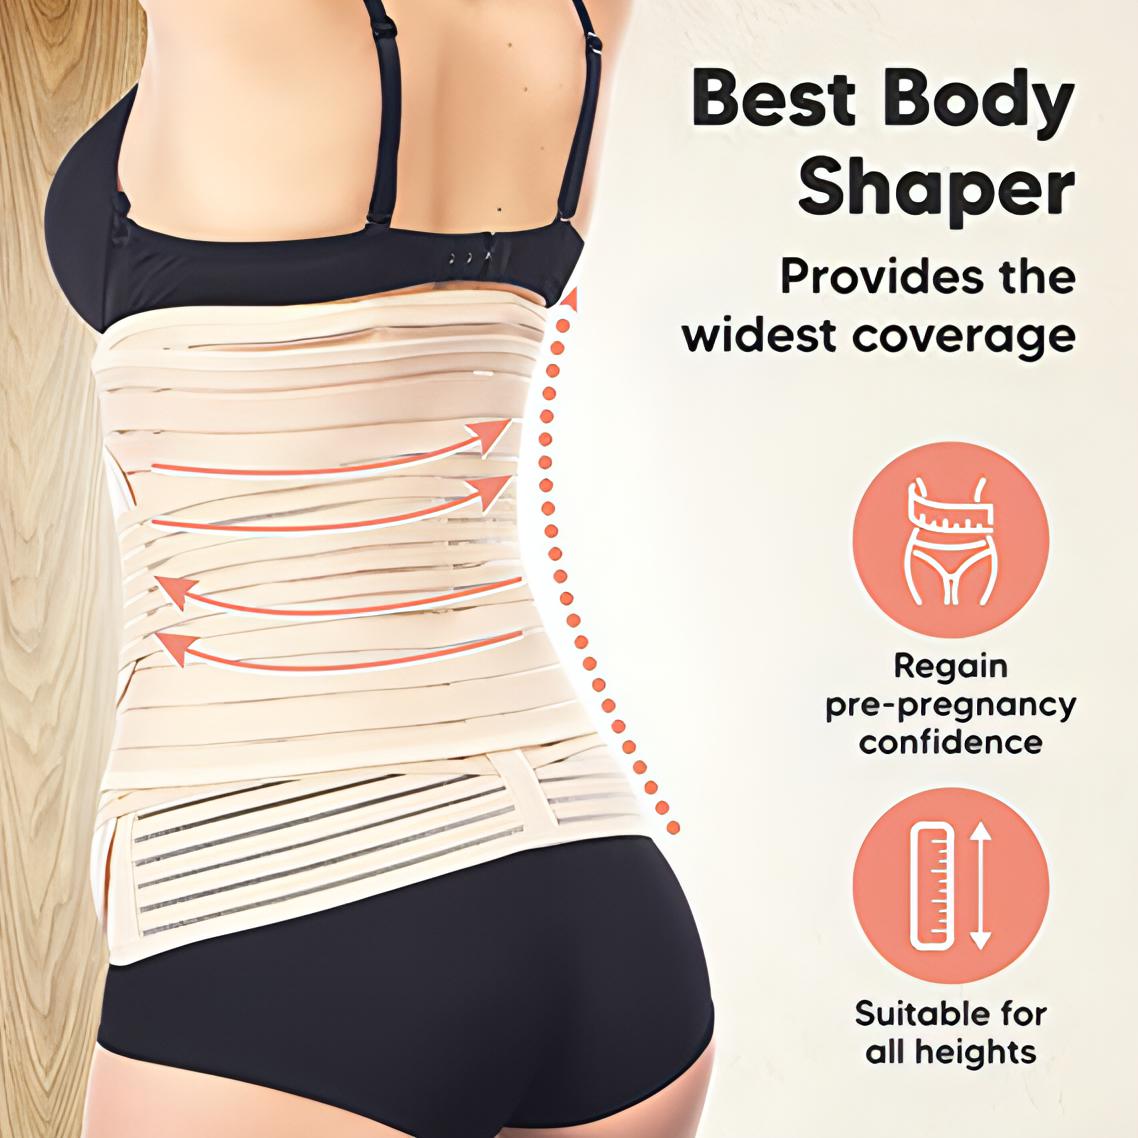 SHOPBOP 3 in 1 Postpartum Belt After Pregnancy & C Section Recovery Belly  Support Body Shaper Recovery Belt